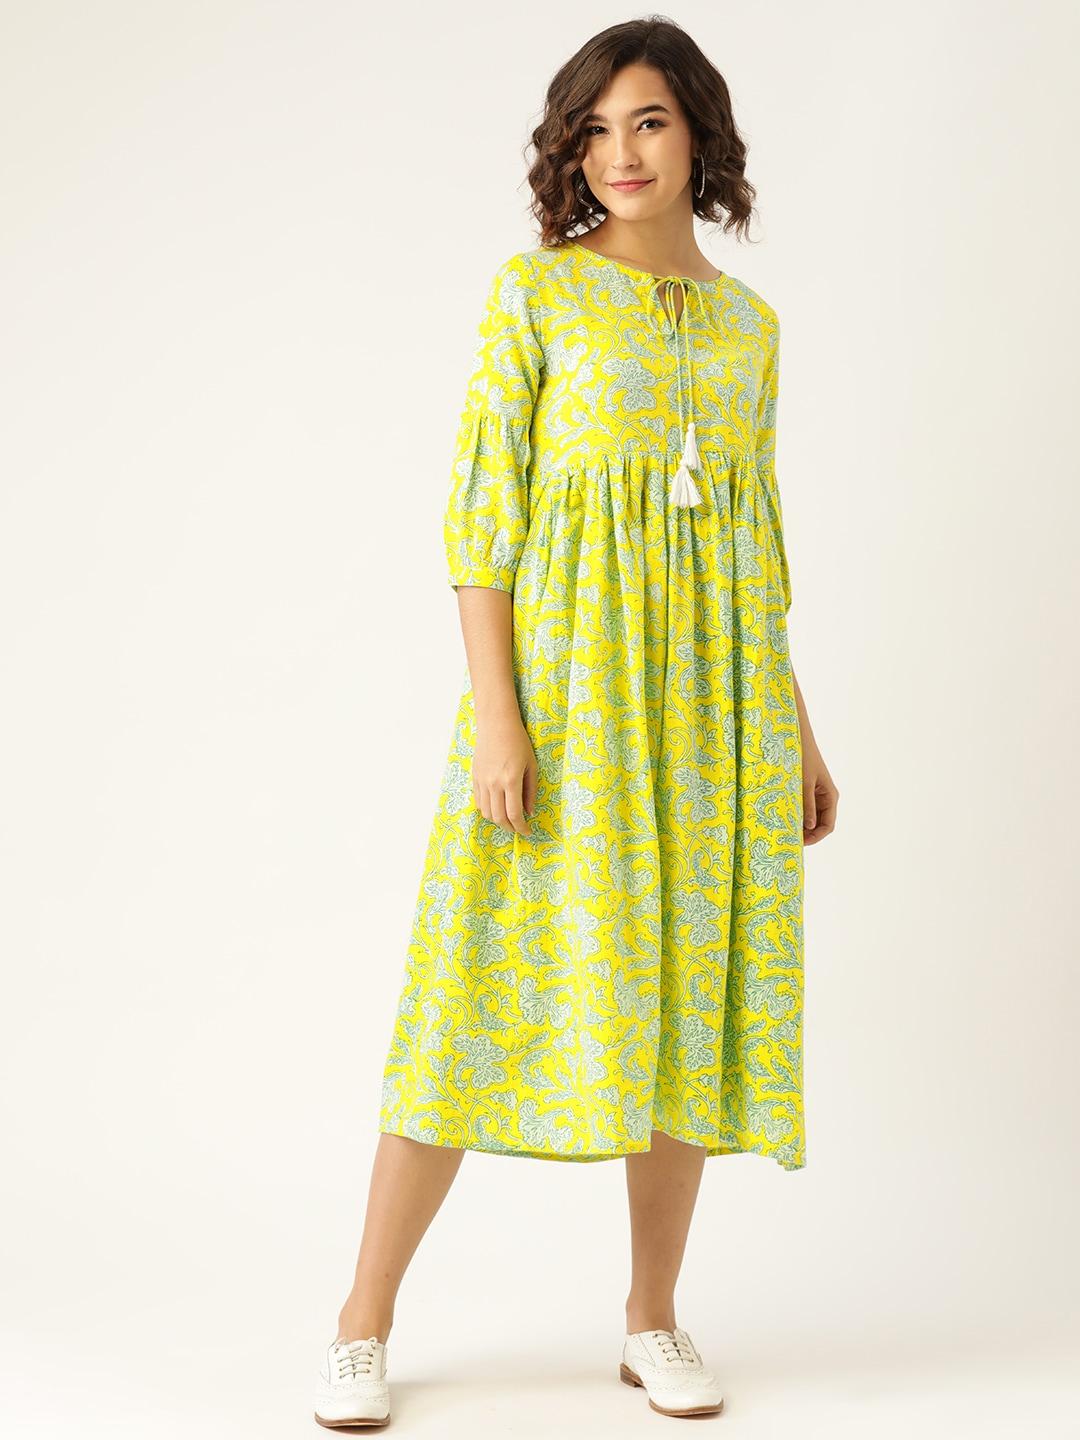 shae by sassafras yellow & green pure cotton floral tie-up neck a-line midi dress